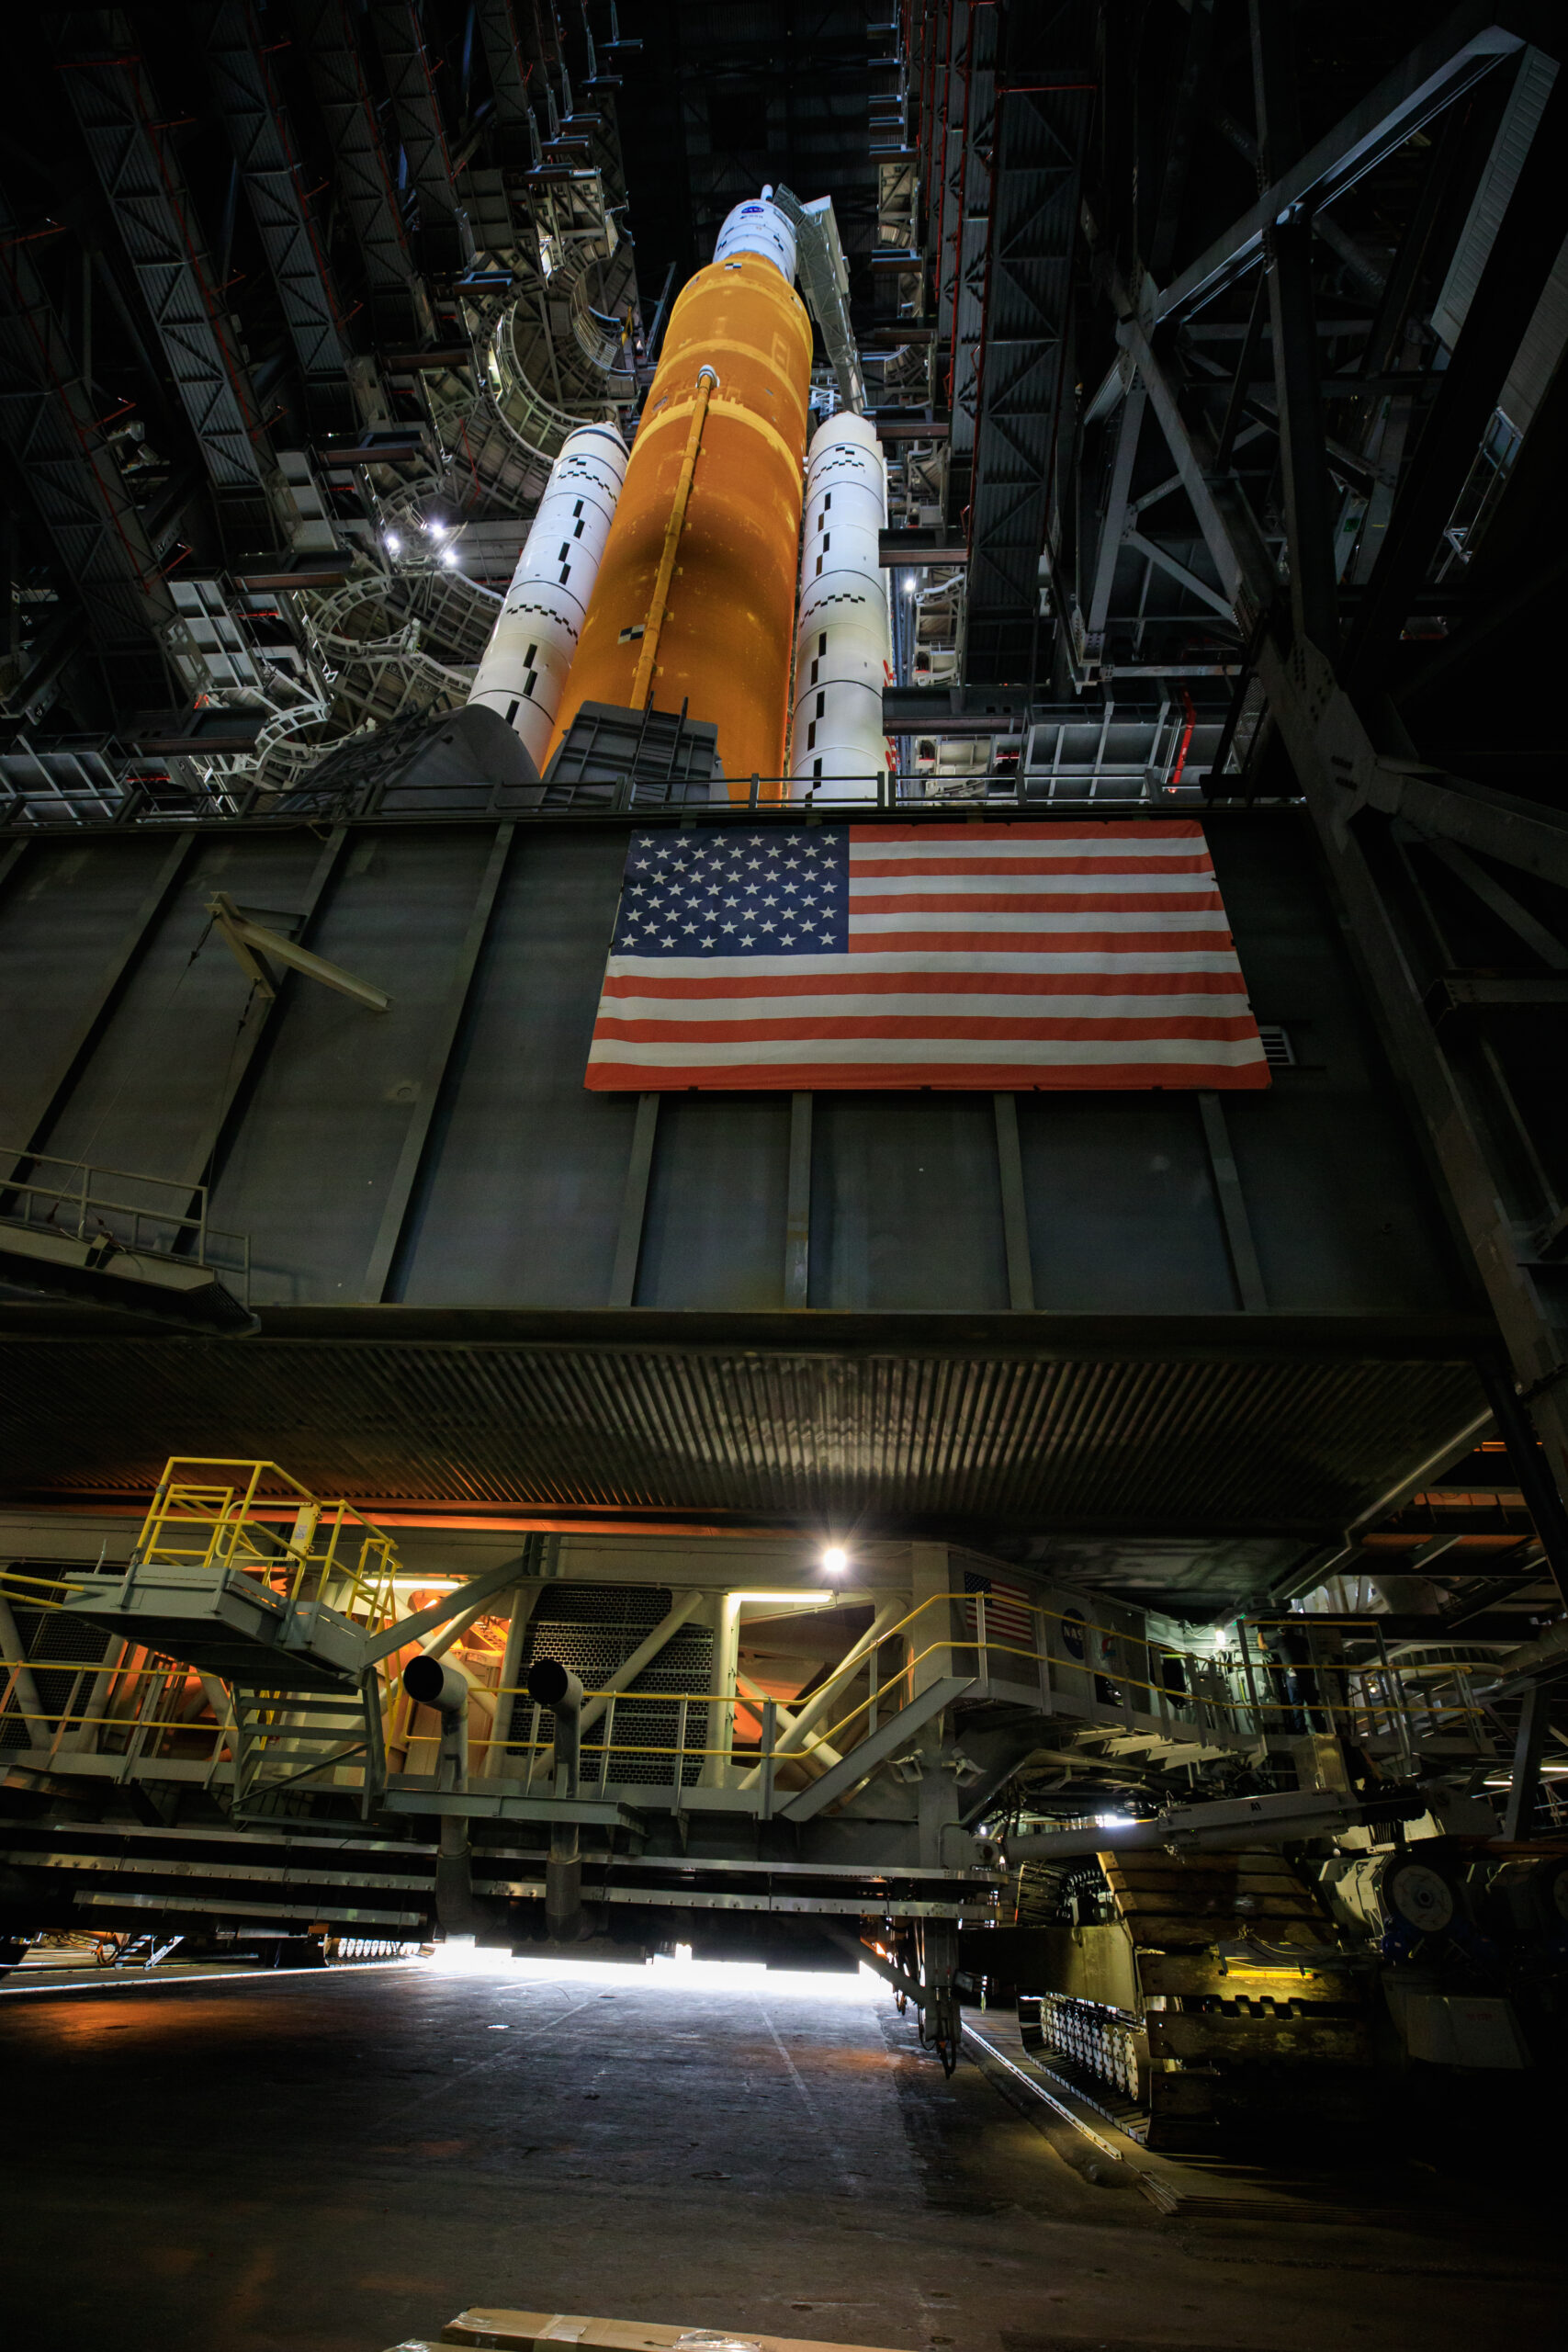 With all of the work platforms retracted, NASA’s Space Launch System and Orion spacecraft atop the mobile launcher are in view in High Bay 3 of the Vehicle Assembly Building at the agency’s Kennedy Space Center in Florida on June 3, 2022. The crawler-transporter, driven by engineers, will slide under the Artemis I stack atop the mobile launcher and carry it to Launch Complex 39B for a wet dress rehearsal test ahead of the Artemis I launch. Artemis I will be the first integrated test of the SLS and Orion spacecraft. In later missions, NASA will land the first woman and the first person of color on the surface of the Moon, paving the way for a long-term lunar presence and serving as a steppingstone on the way to Mars.